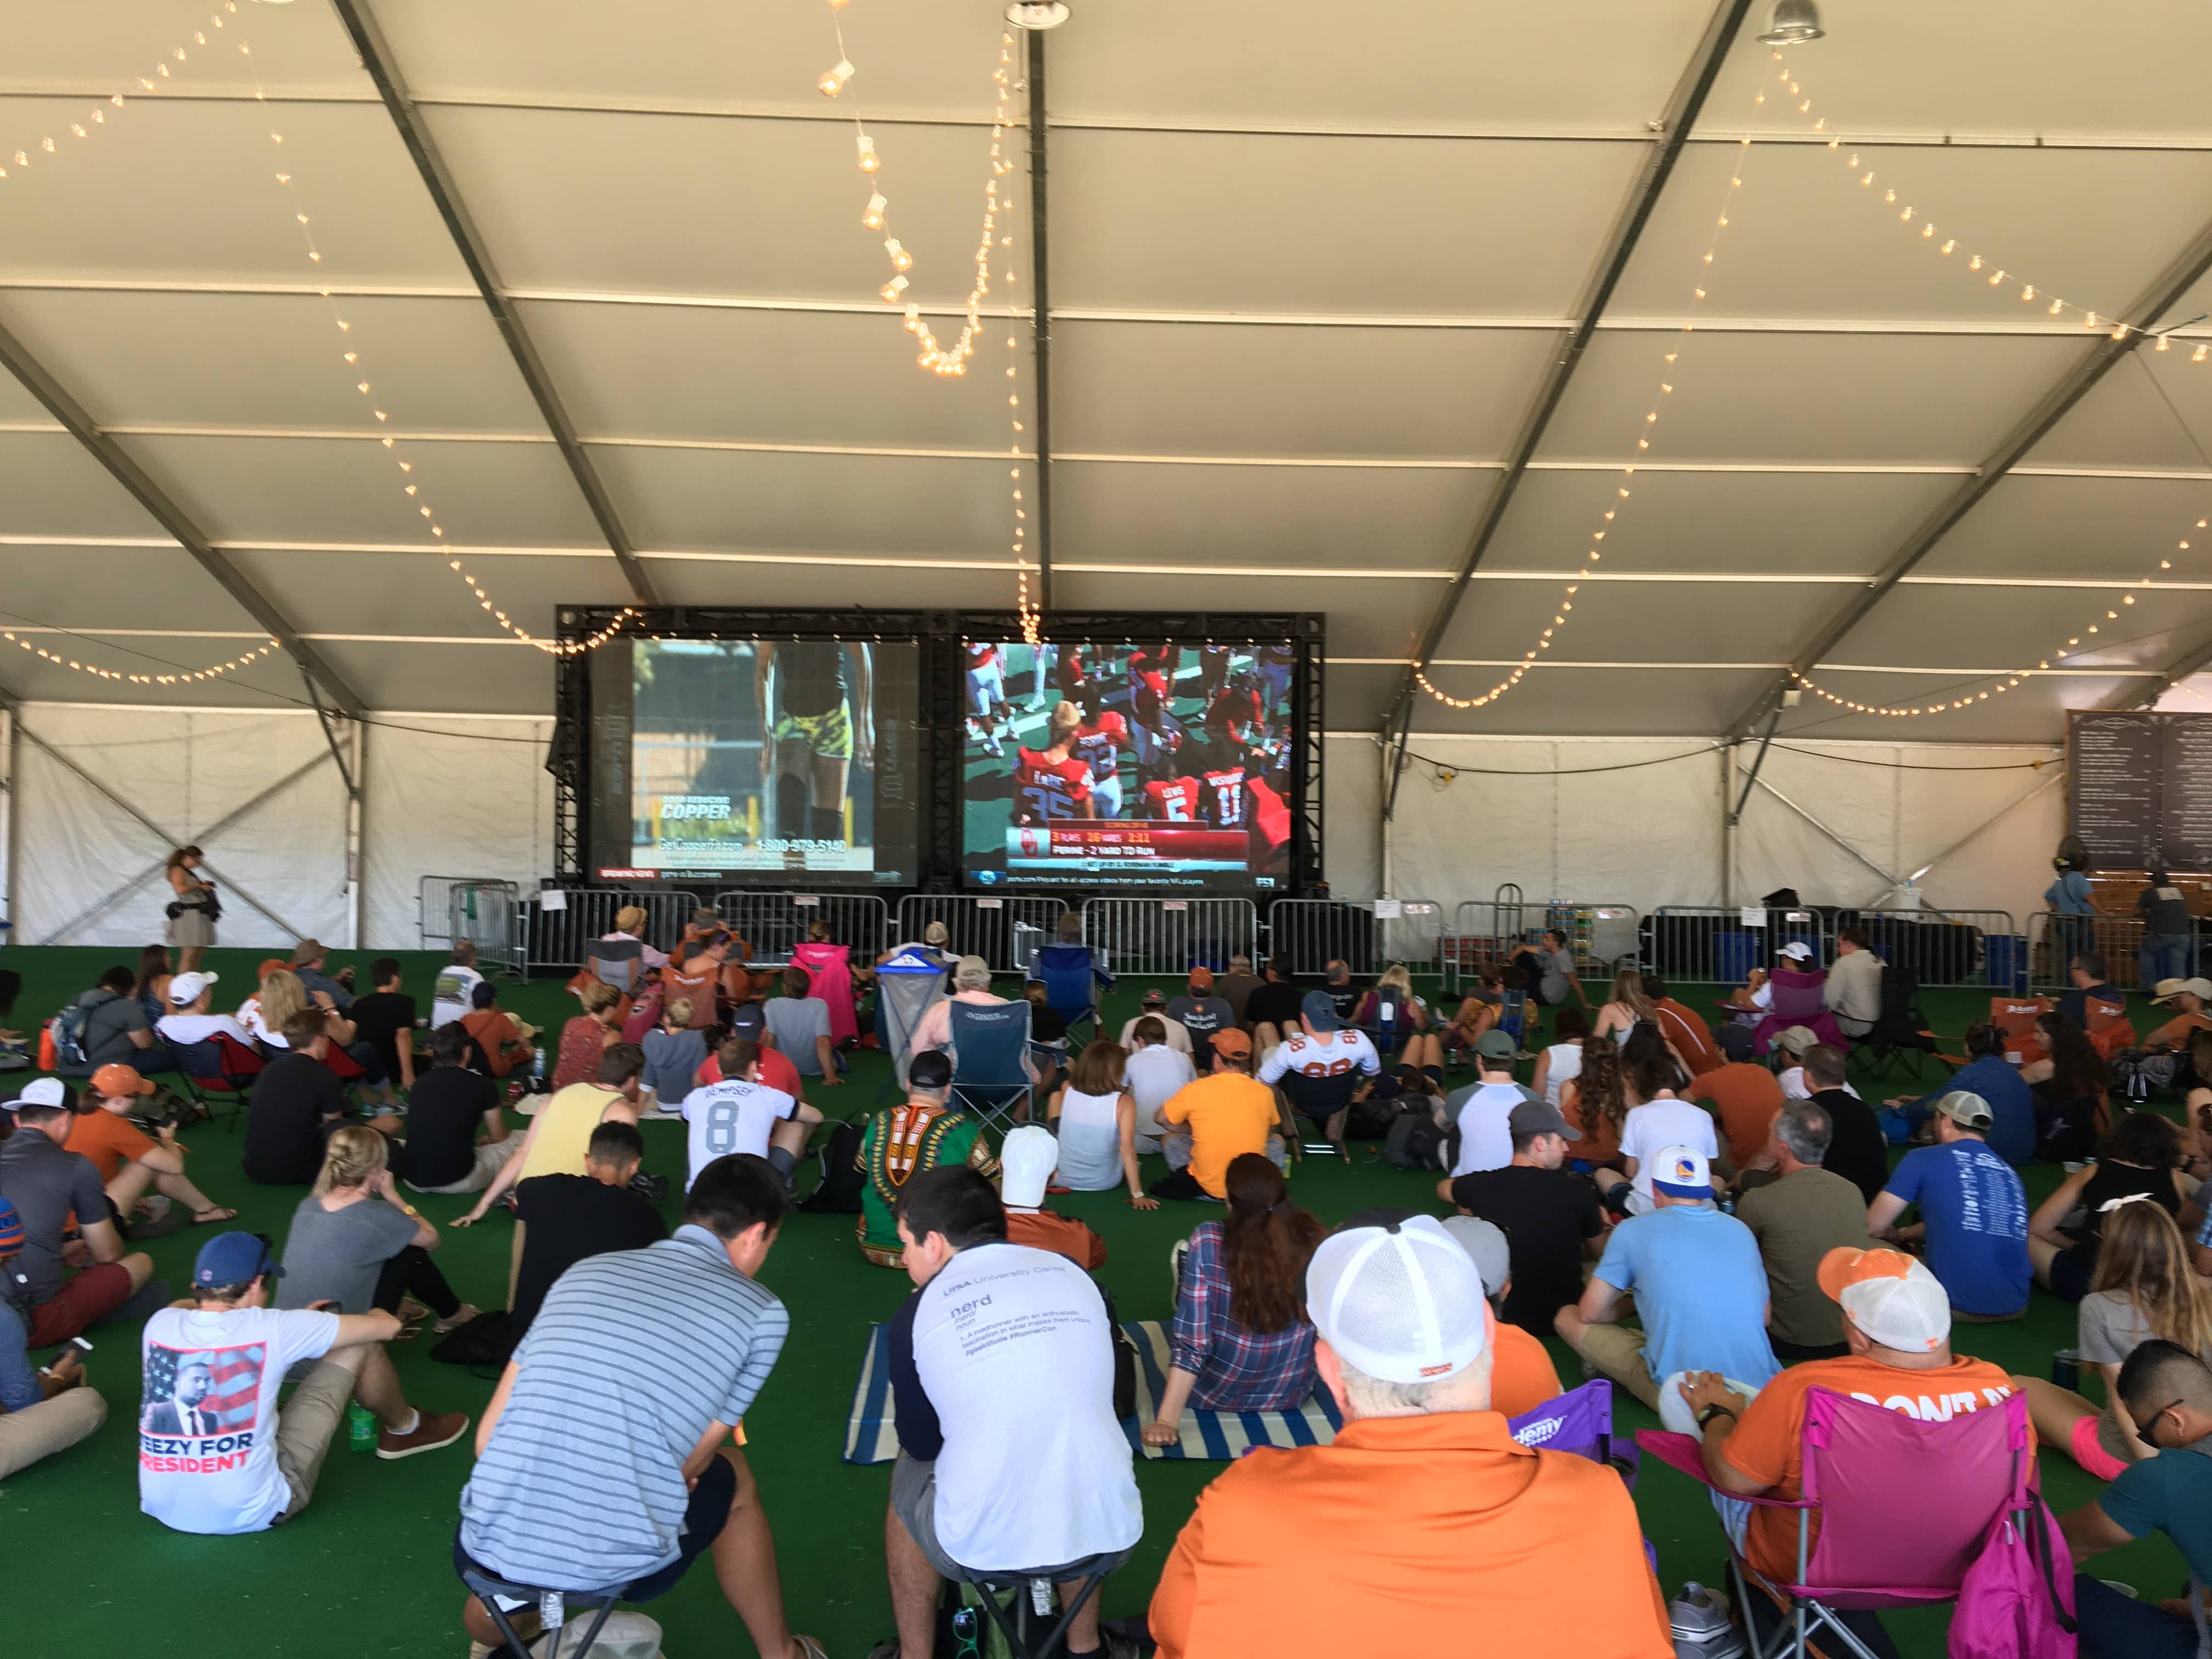 College football in the Beer Tent at ACL